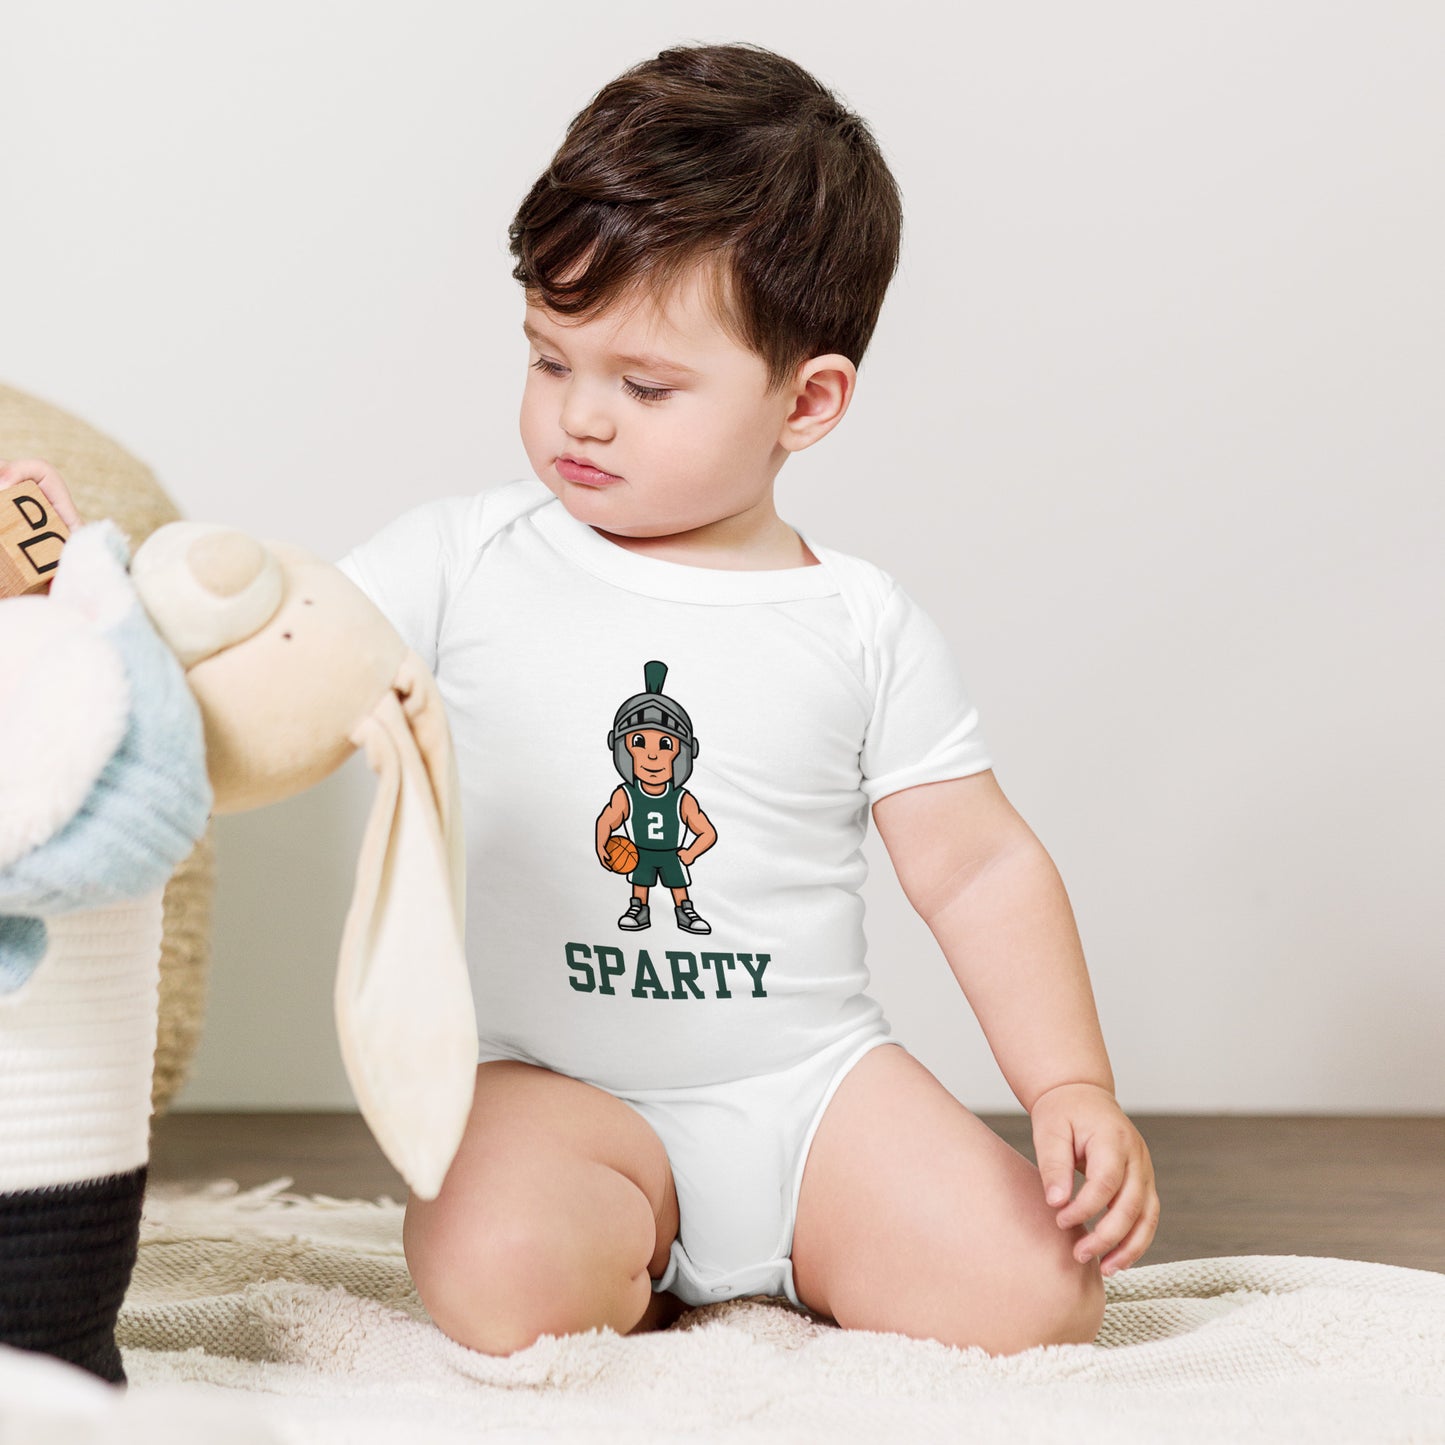 Sparty Baby short sleeve one piece